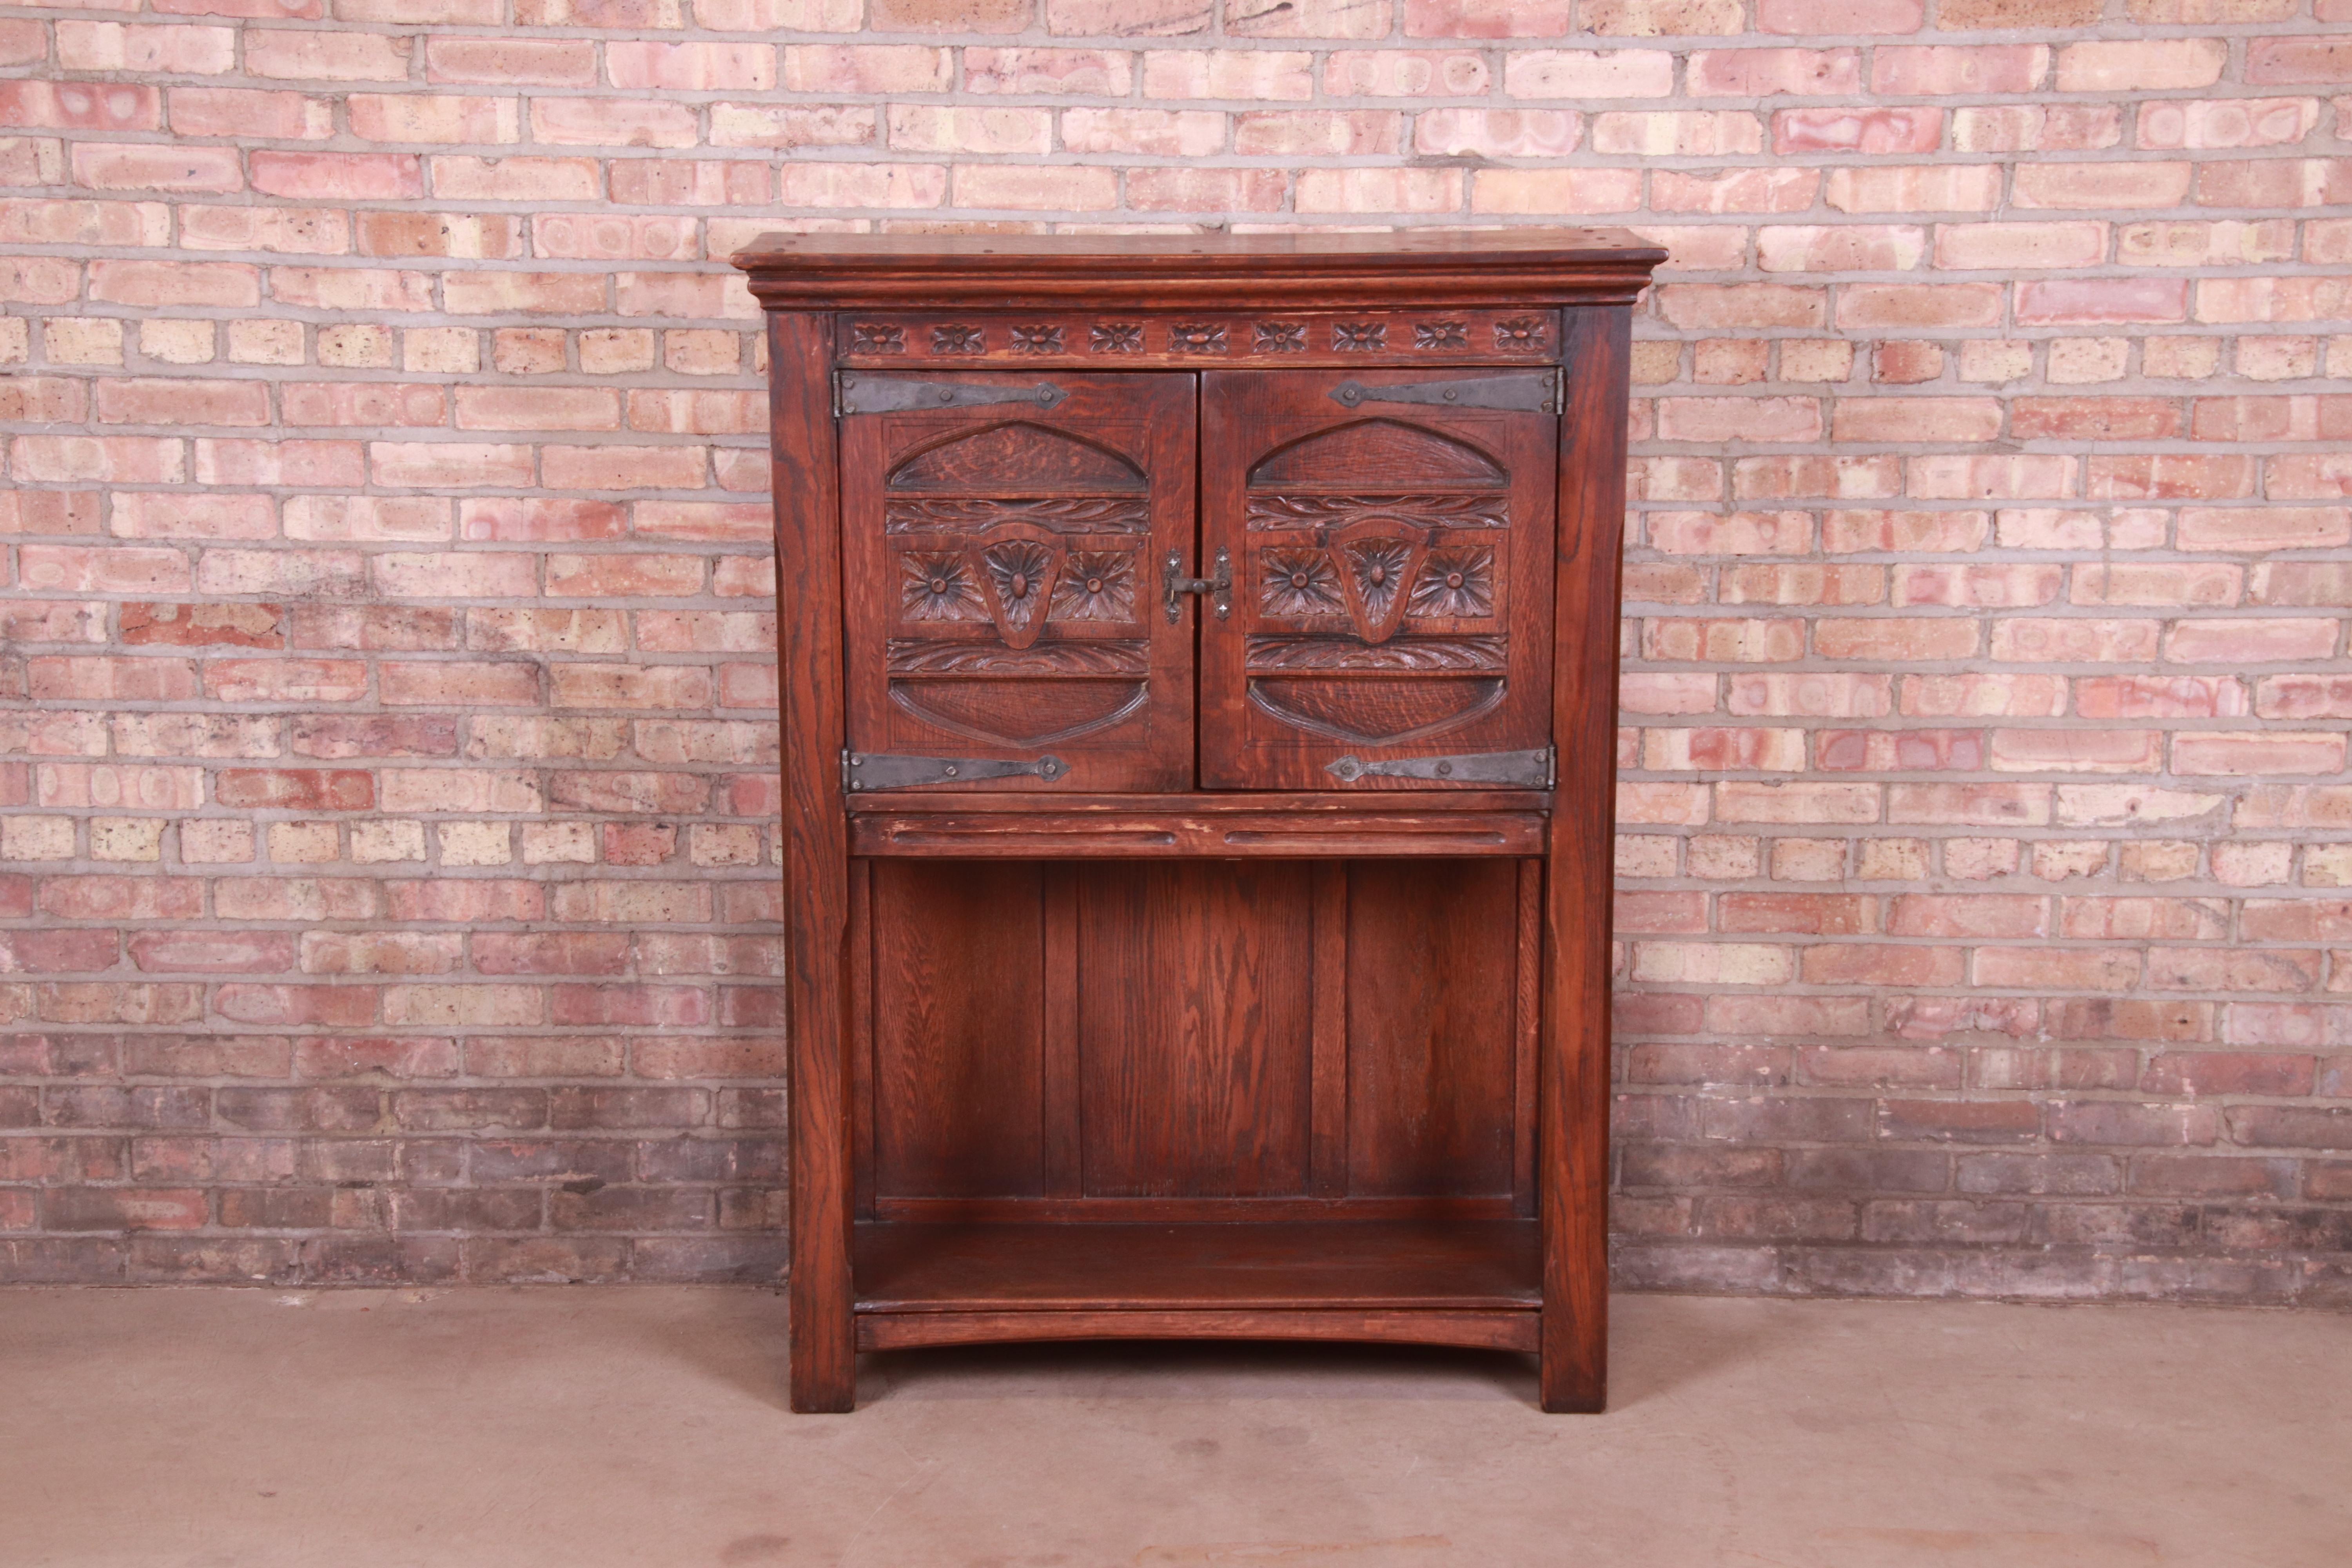 Gothic Revival 19th Century Rustic European Carved Oak Bar Cabinet